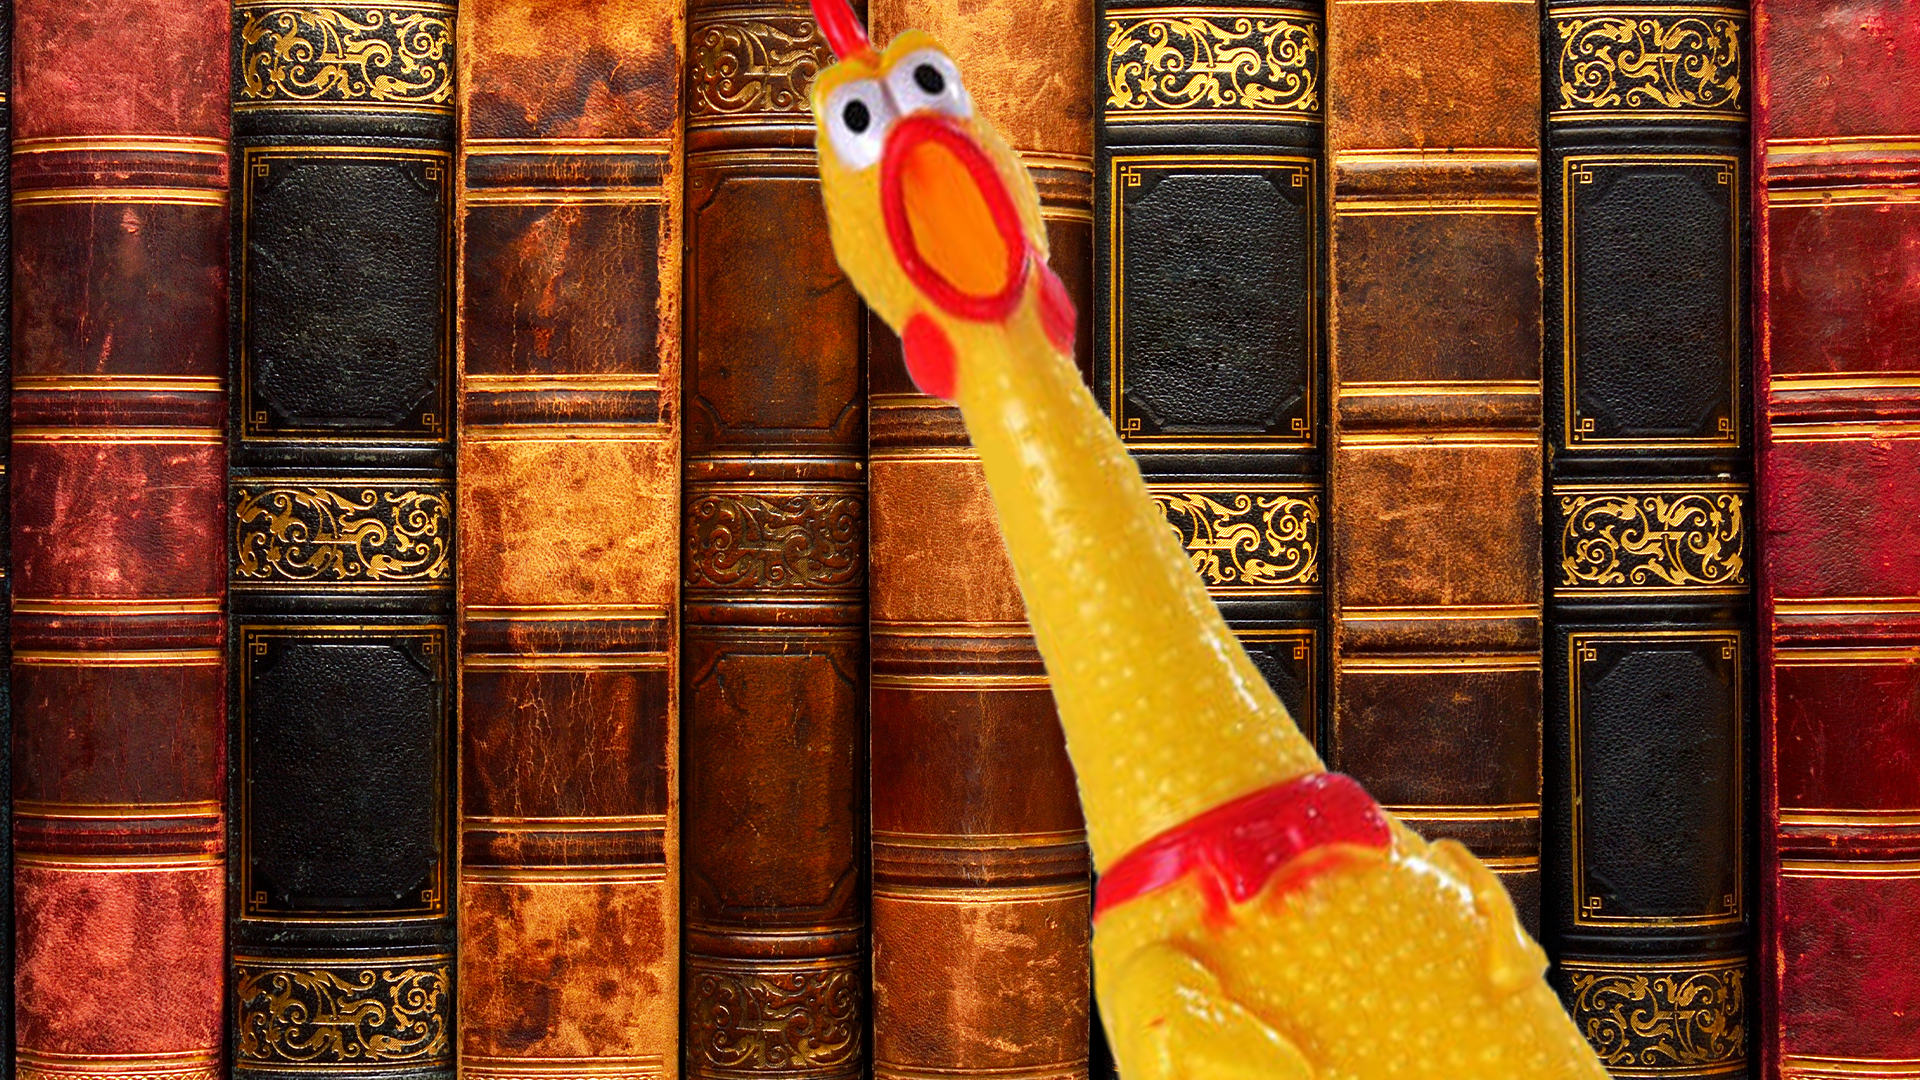 Some old books and a rubber chicken